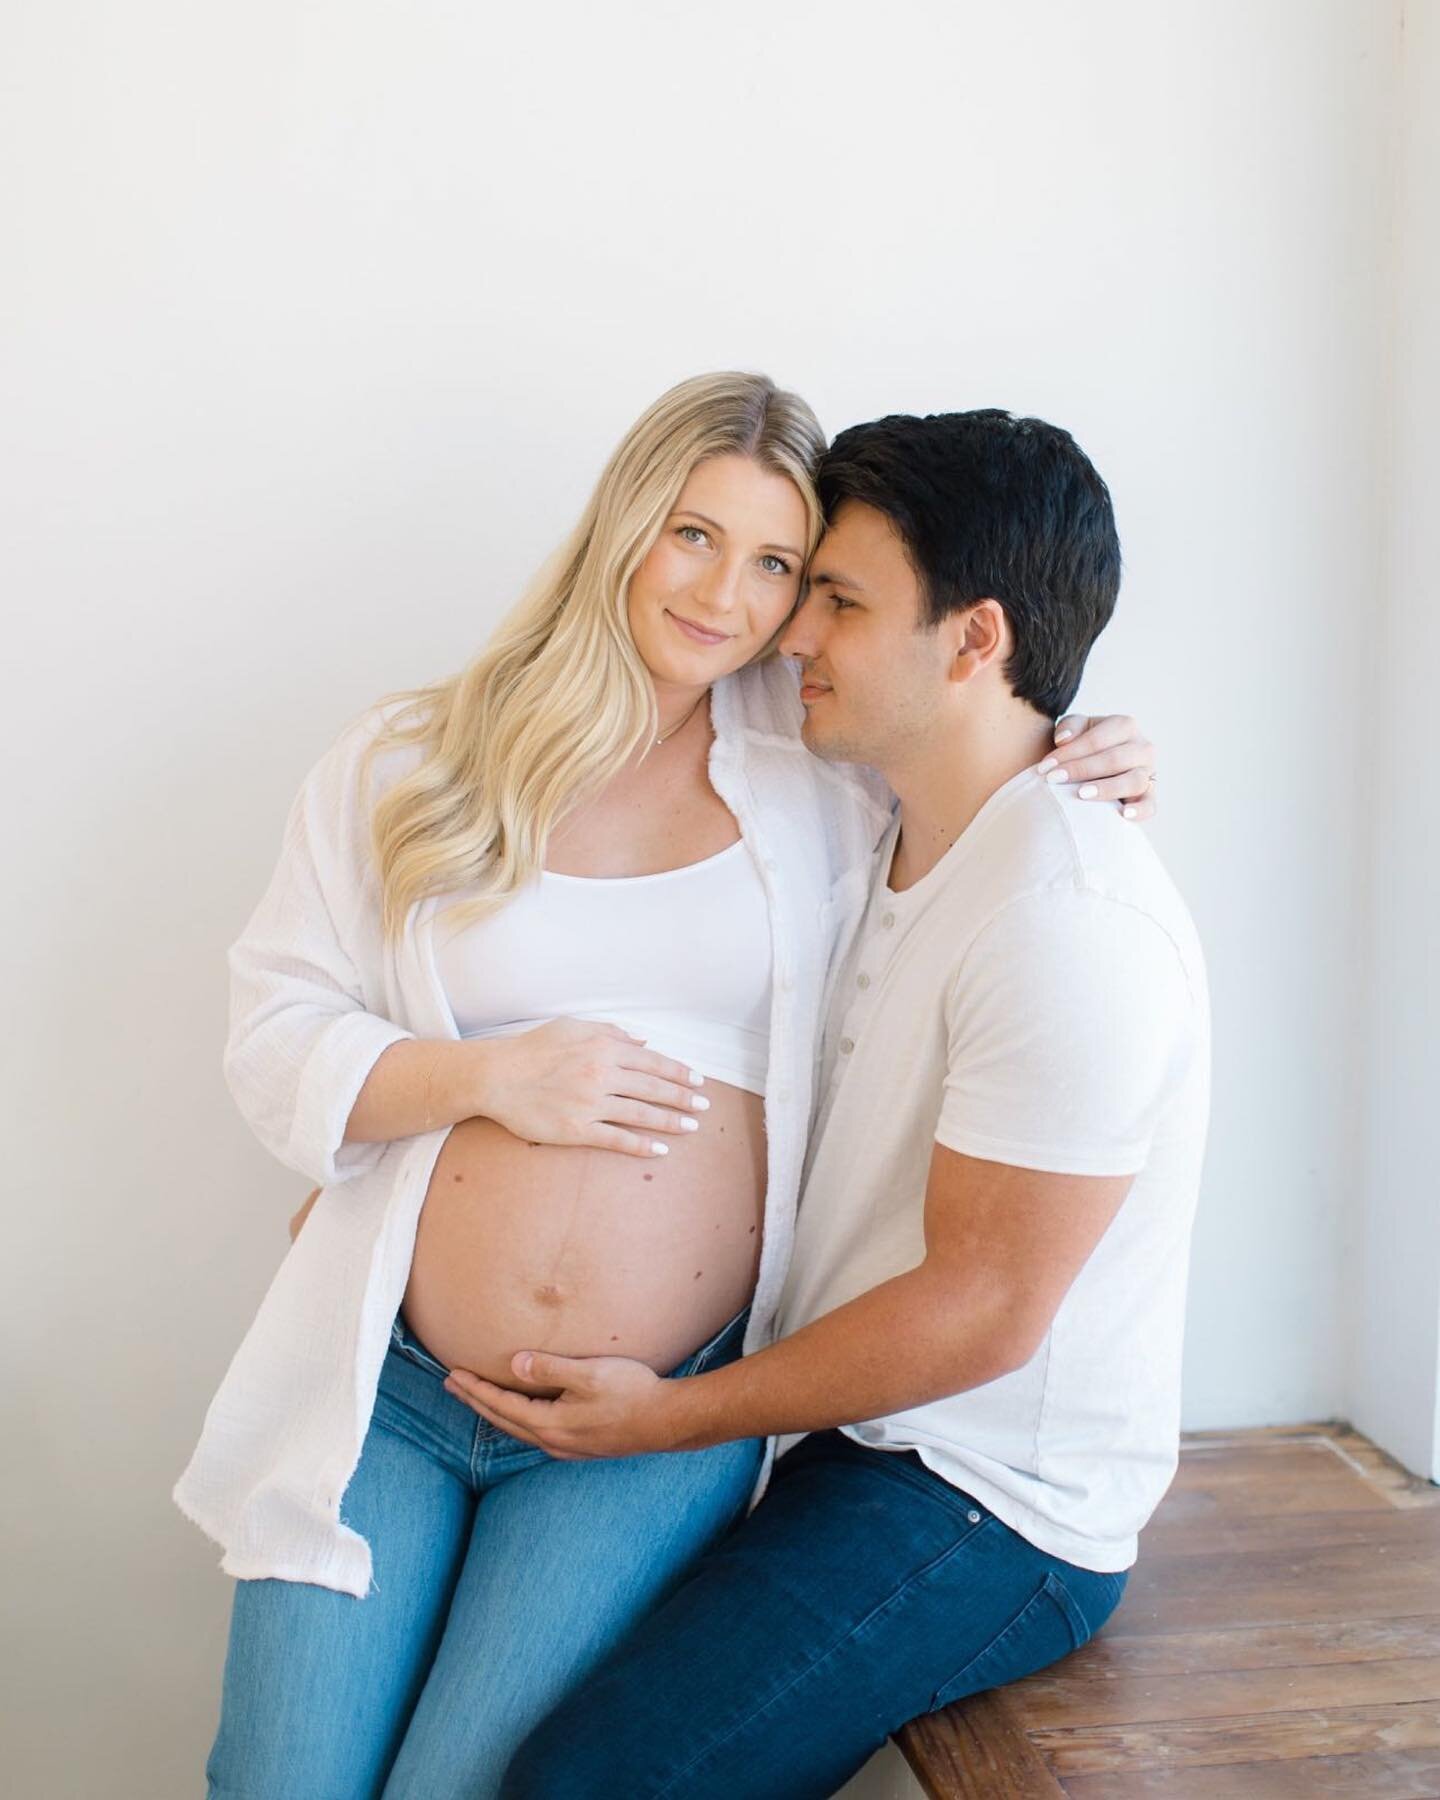 Meet Kyra, Max, &amp; baby! Baby&rsquo;s due date is so soon! Our due dates were 2 weeks apart, which made for such a fun session. Kyra and I could totally relate to all the pregnancy/3rd trimester struggles. They also have waited to find out whether